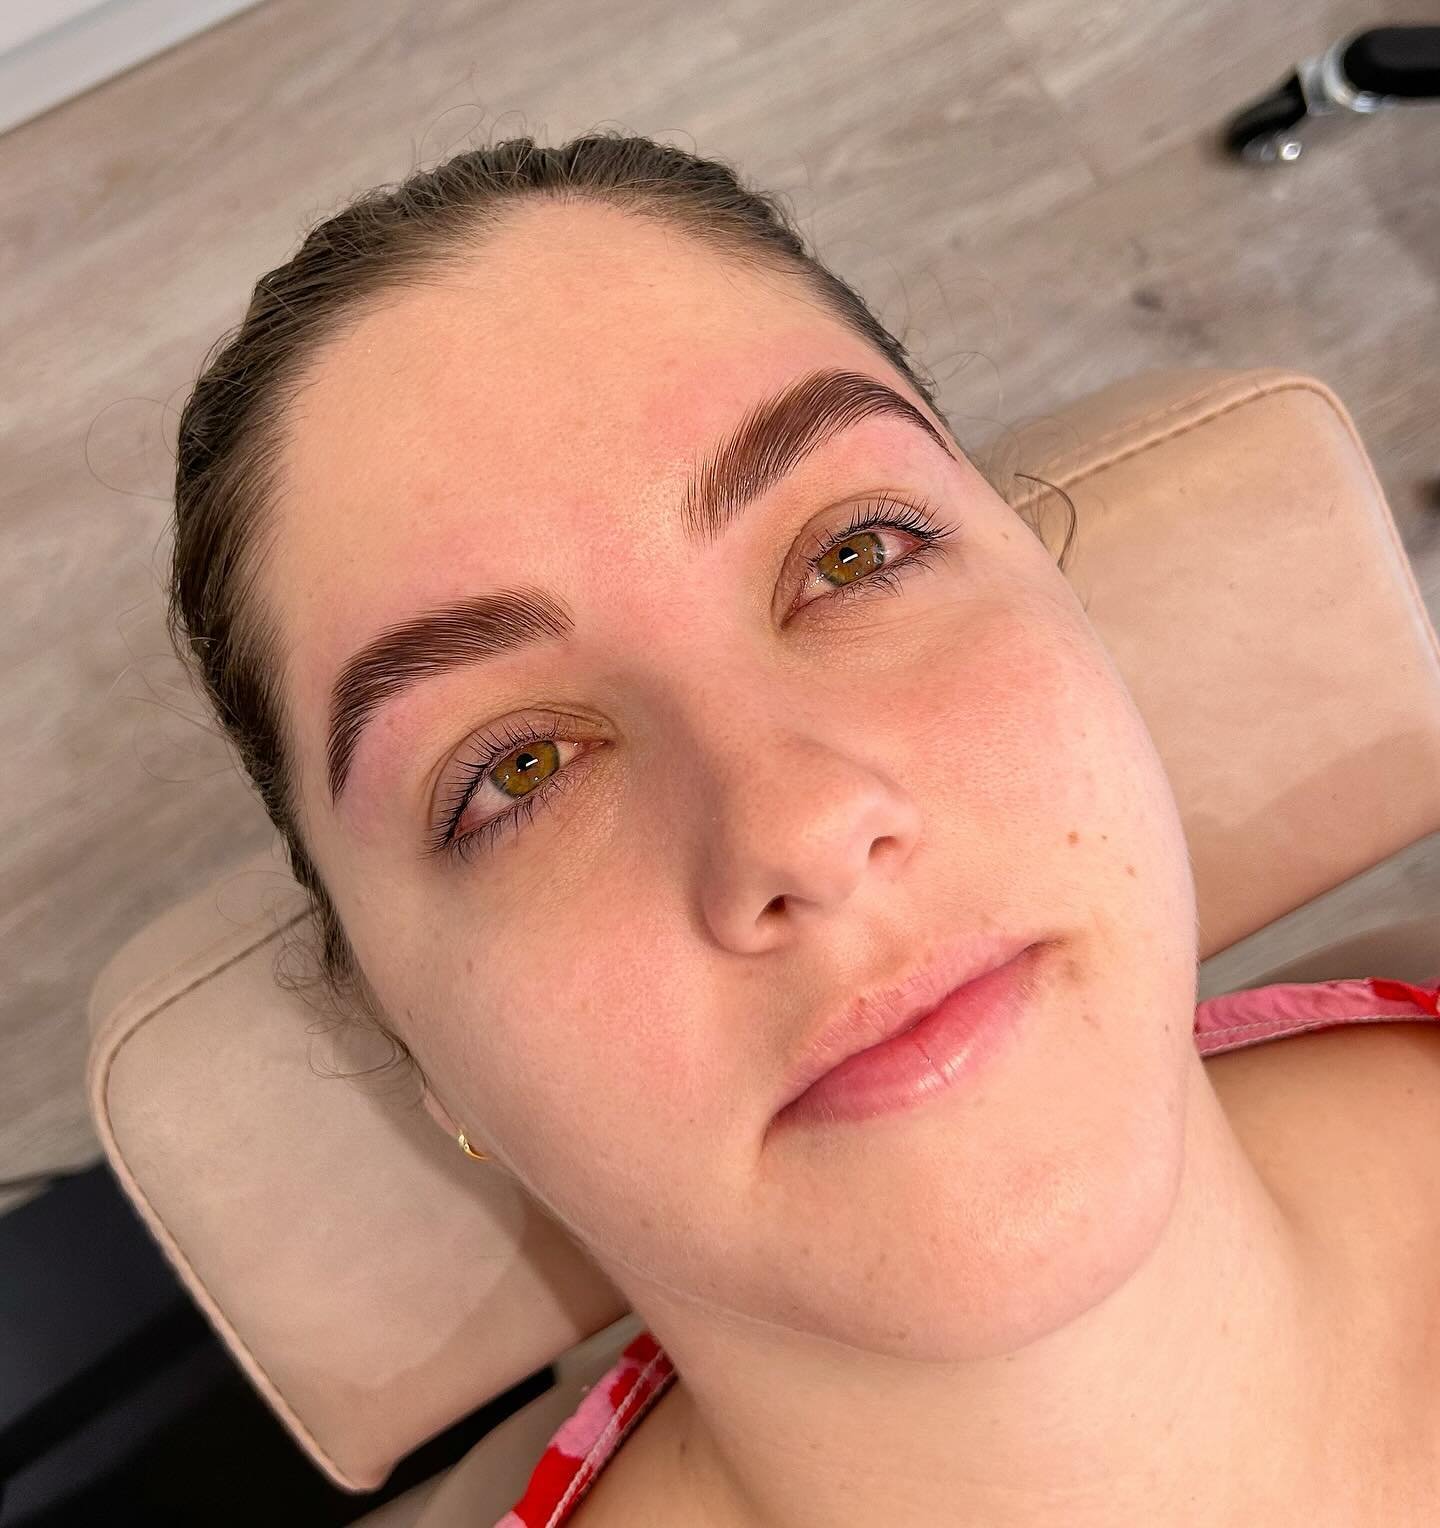 Aren&rsquo;t these brows just gorgeous?!
Swipe for a close up ➡️ and before 🫶🏻
Brow lamination and lash lift package |
I focused on a smooth directional lamination with a light tint to build some fullness in the centre of the brow 💪🏼